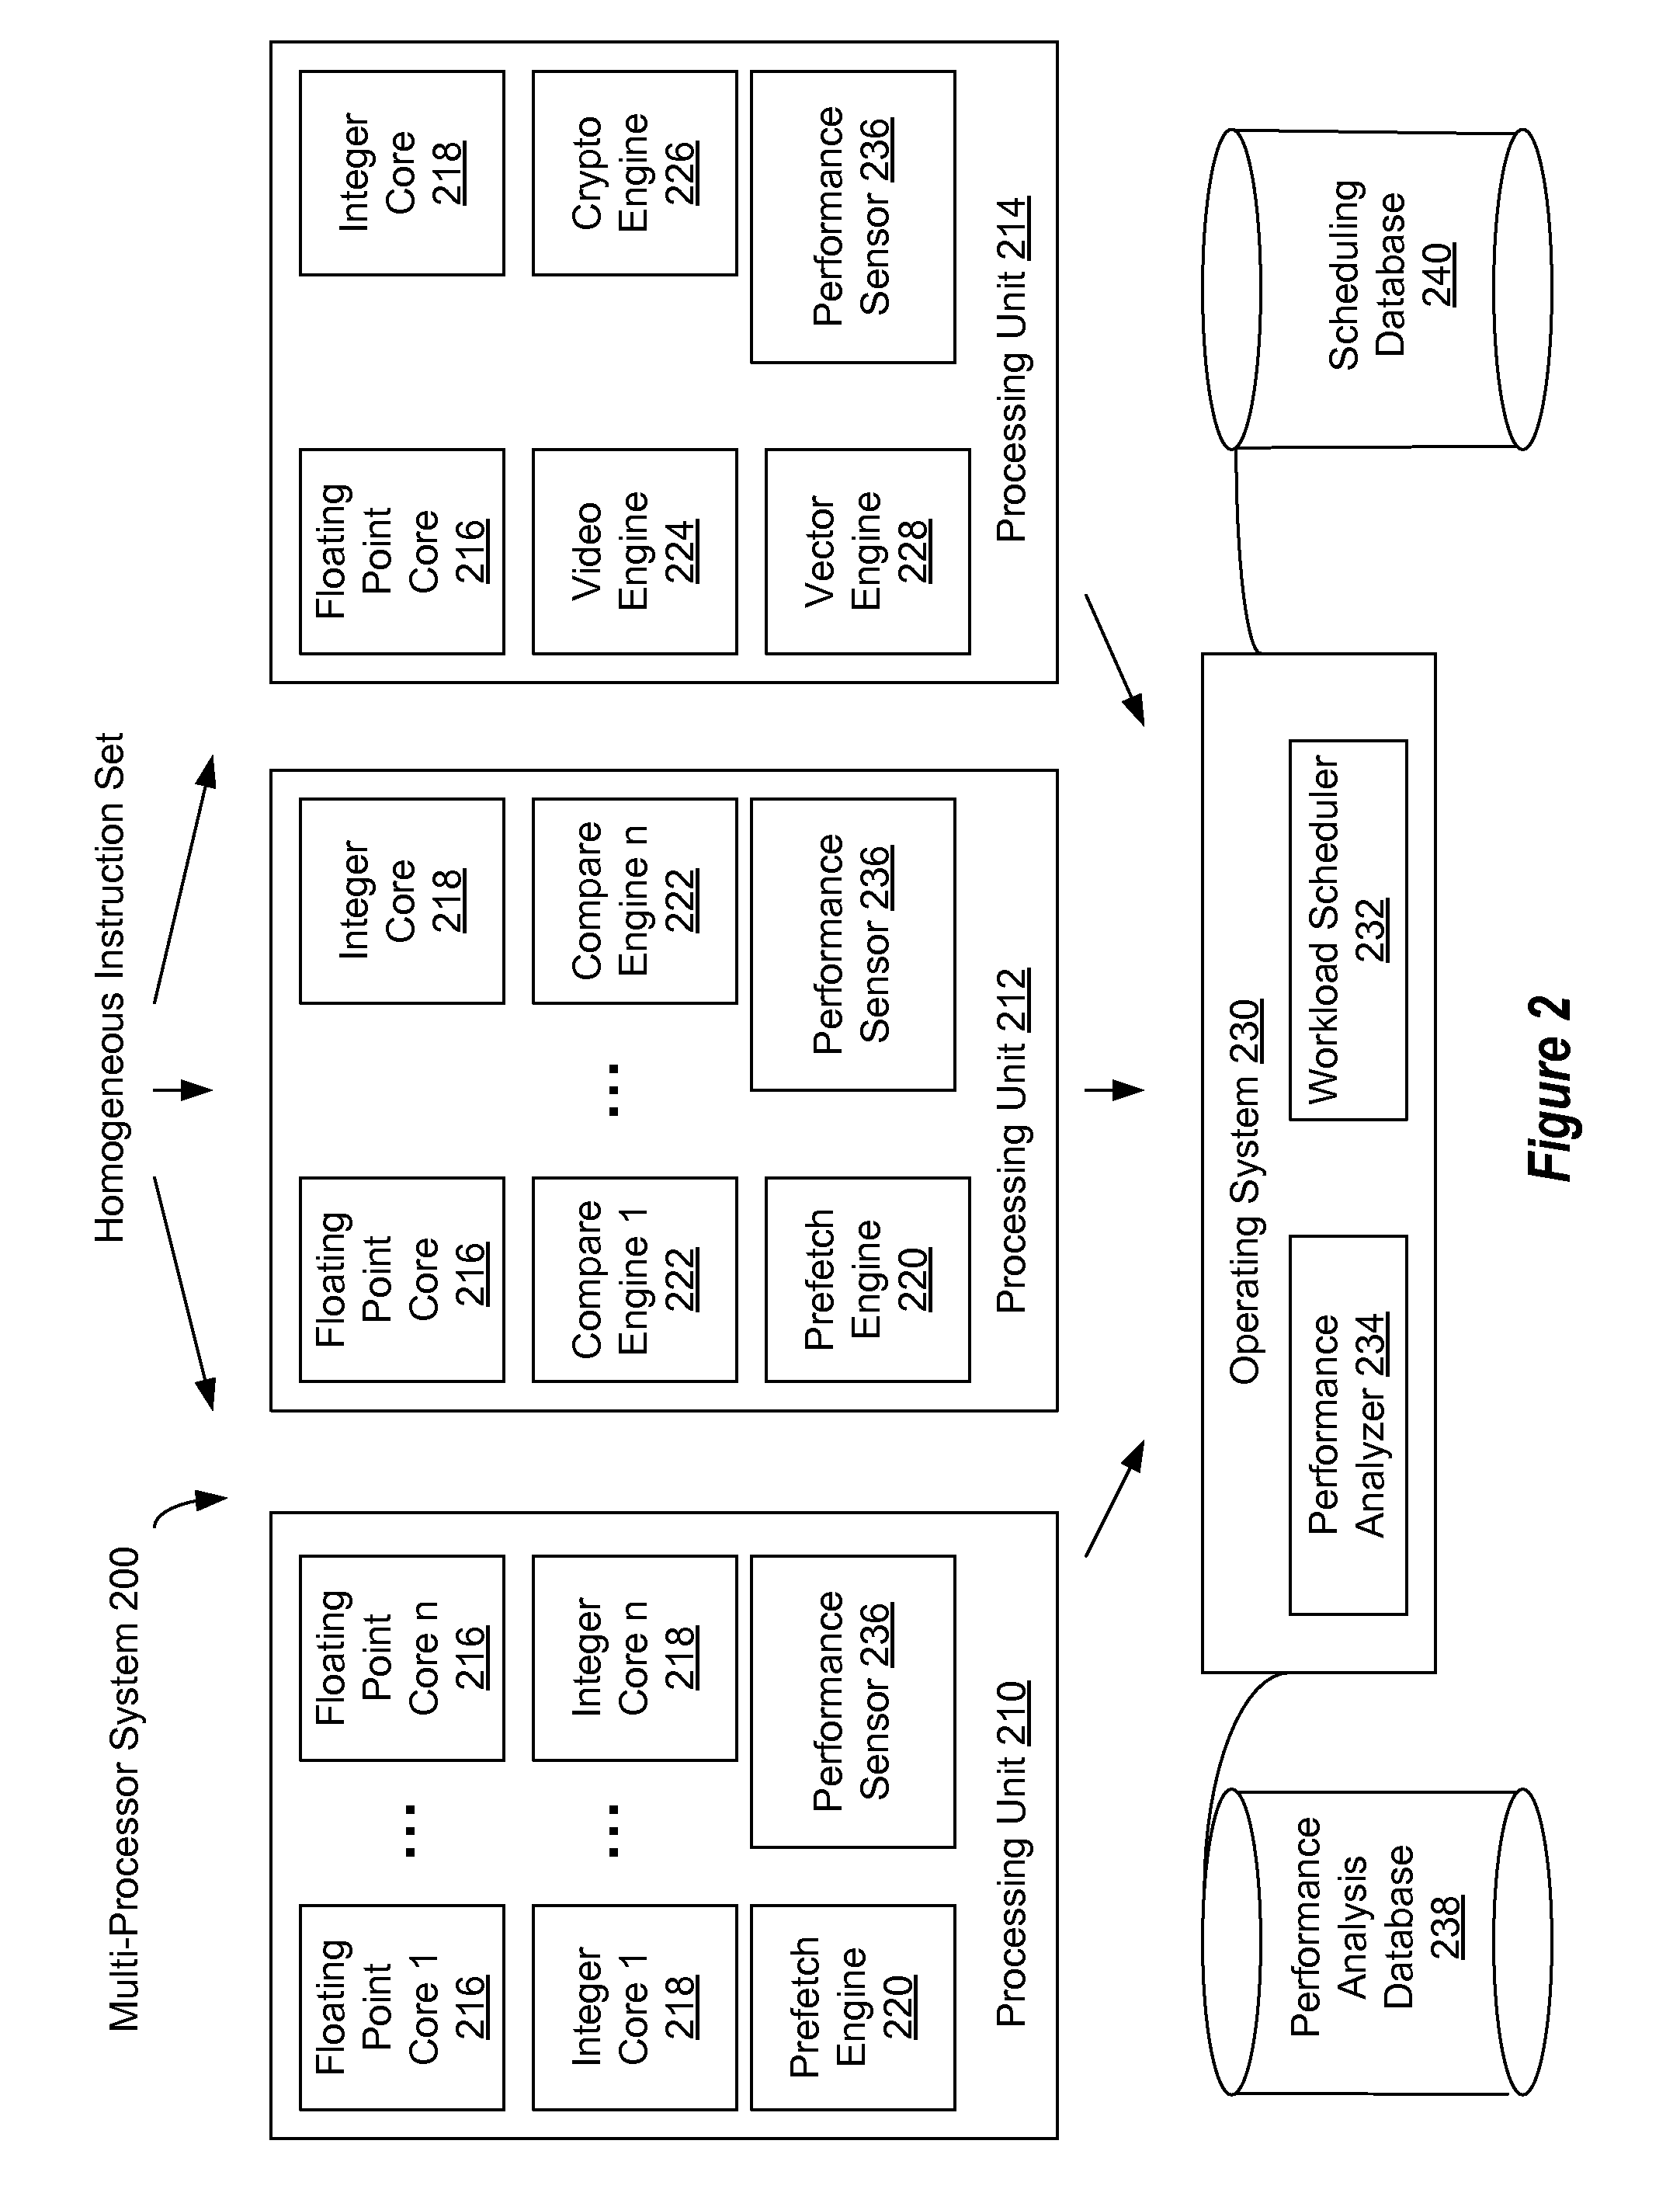 Multicore Processor And Method Of Use That Configures Core Functions Based On Executing Instructions